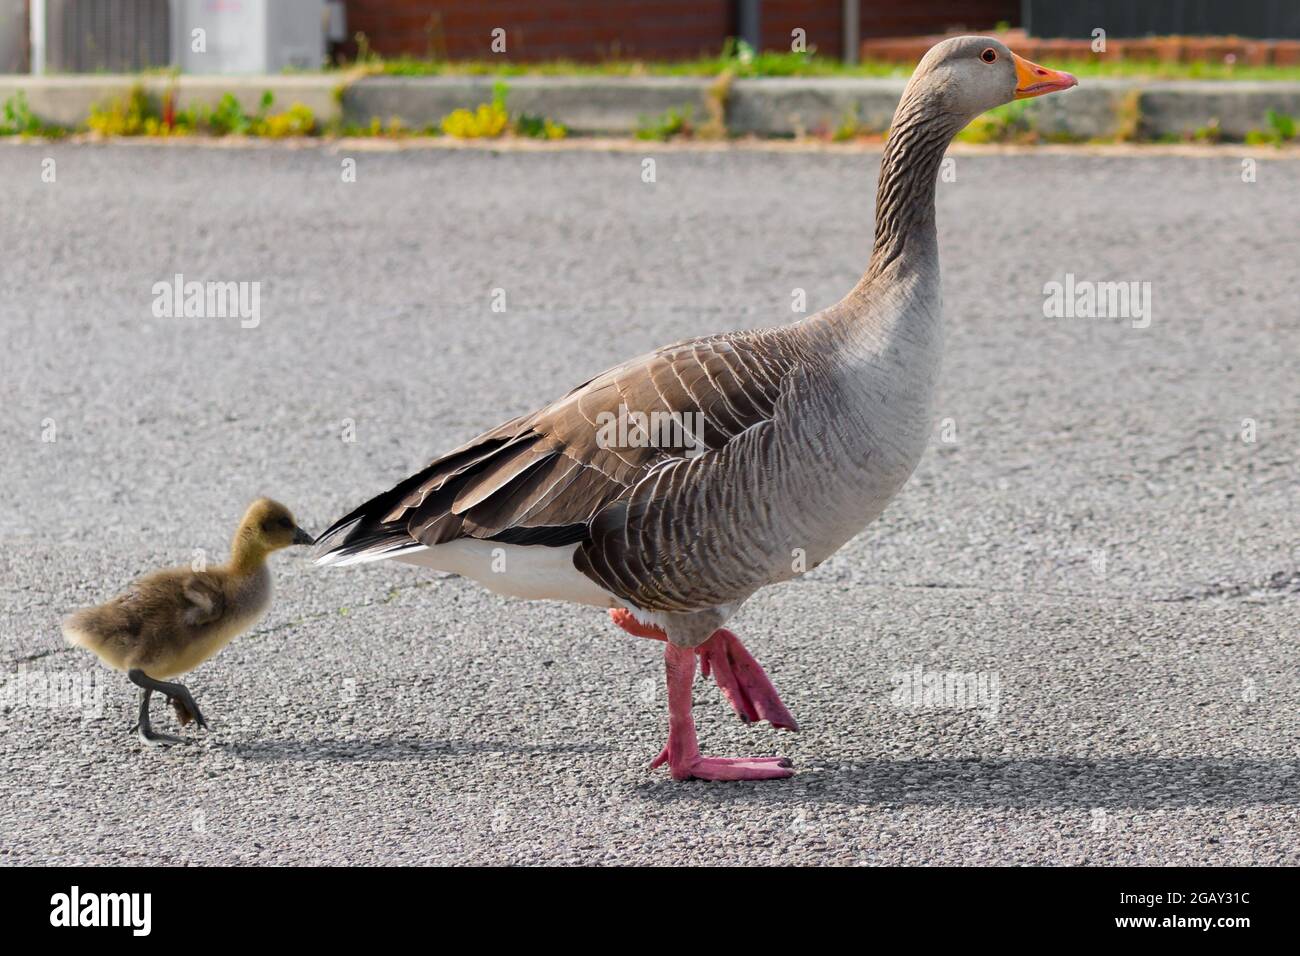 Greylag goose with gosling on road in urban area Stock Photo